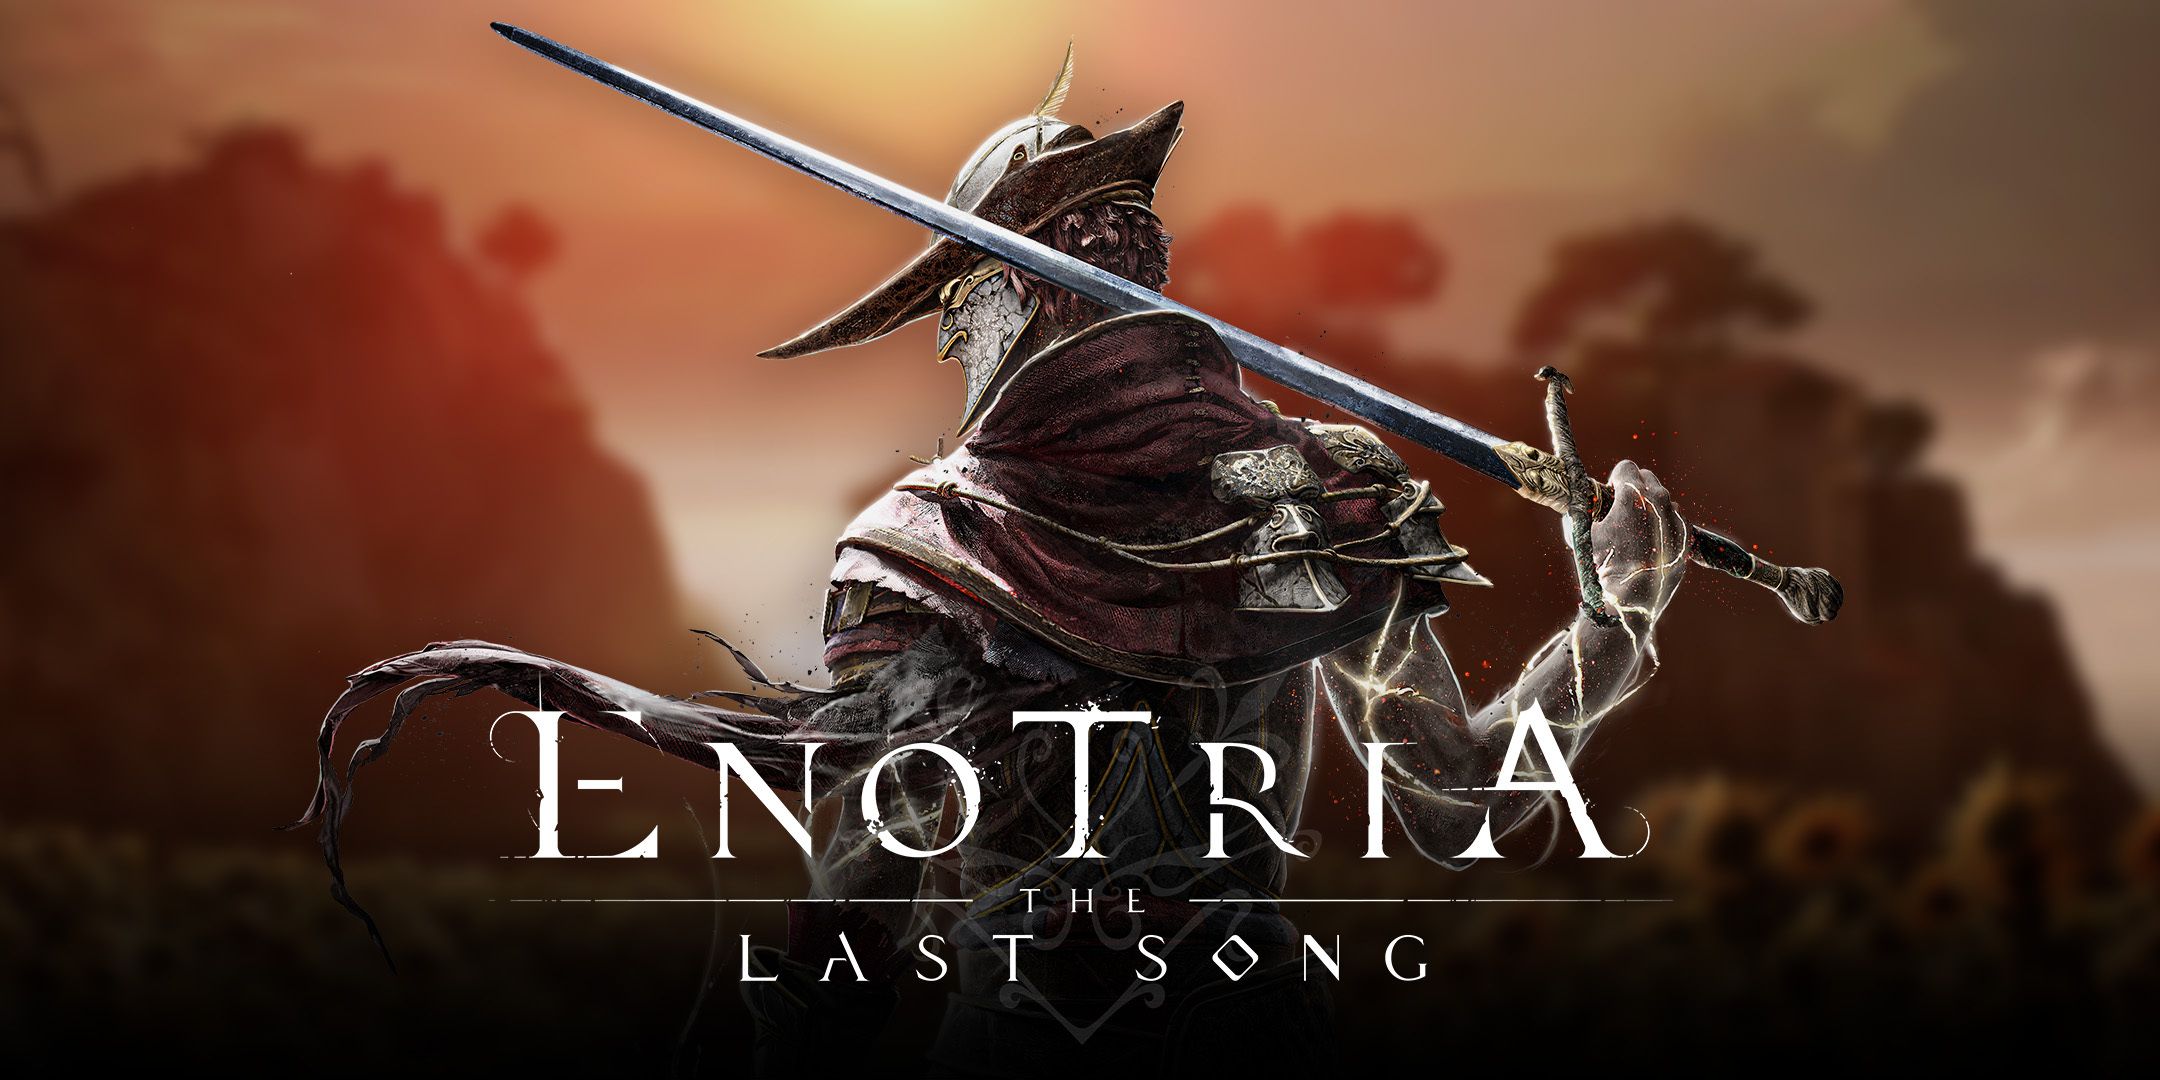 enotria-the-last-song-preview-thumbnail-2